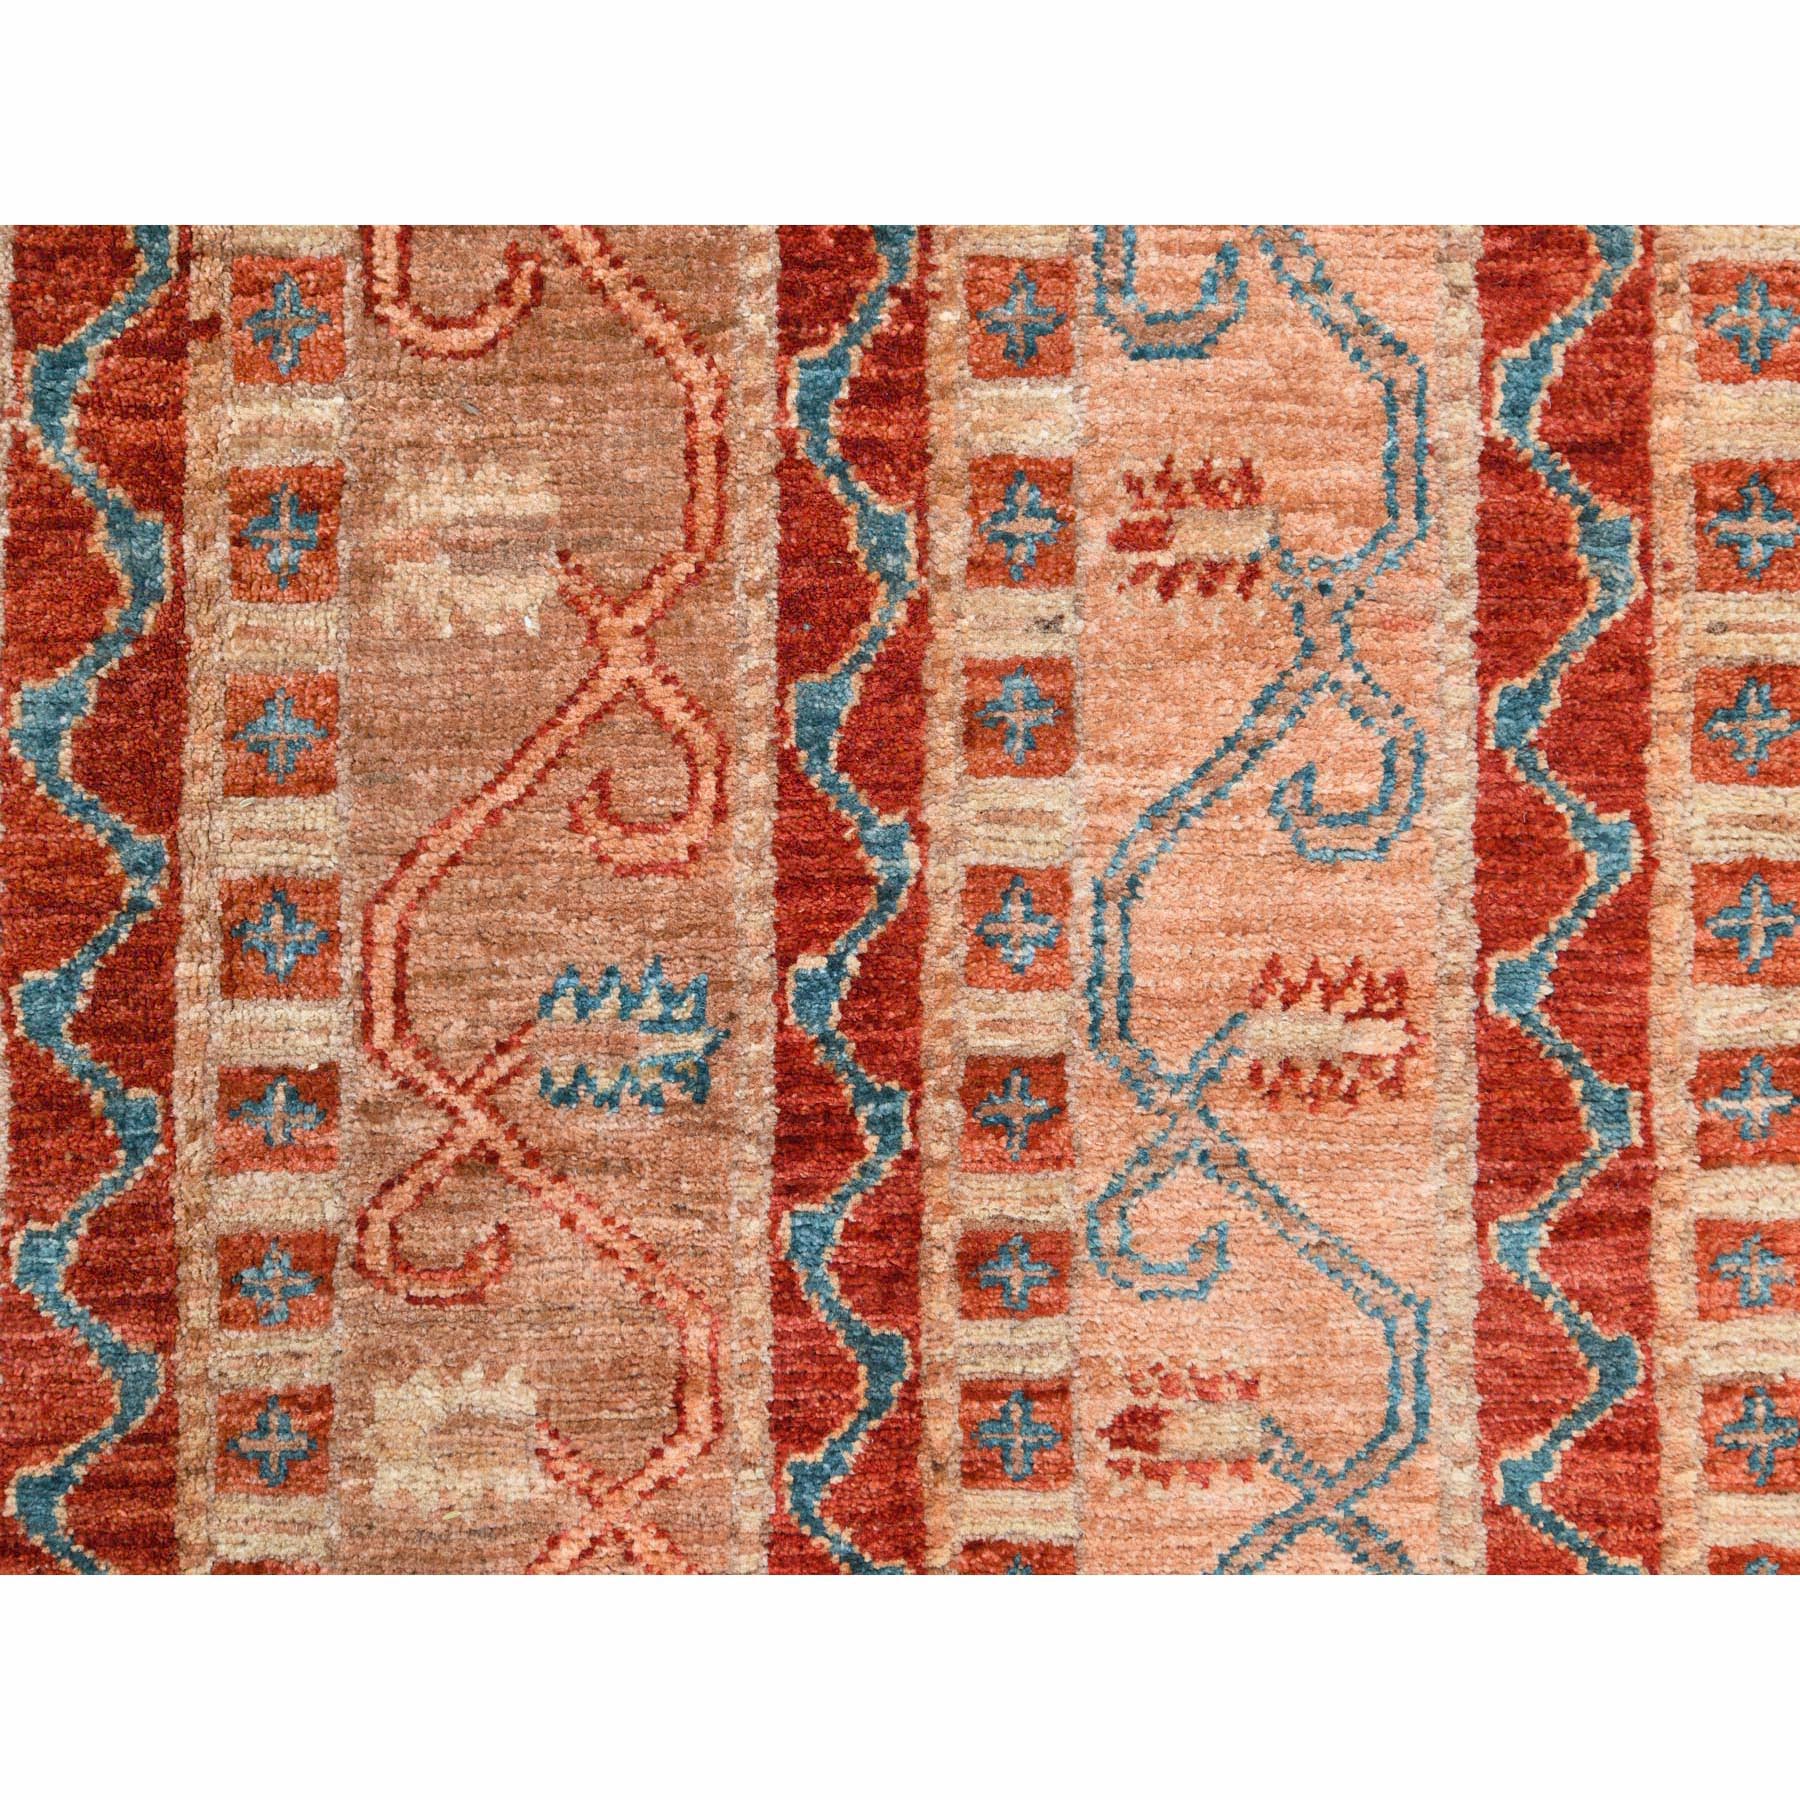 6'2"x8'8" Colorful Super Kazak with Shawl Design Hand Woven Vibrant Pure Wool Oriental Rug 